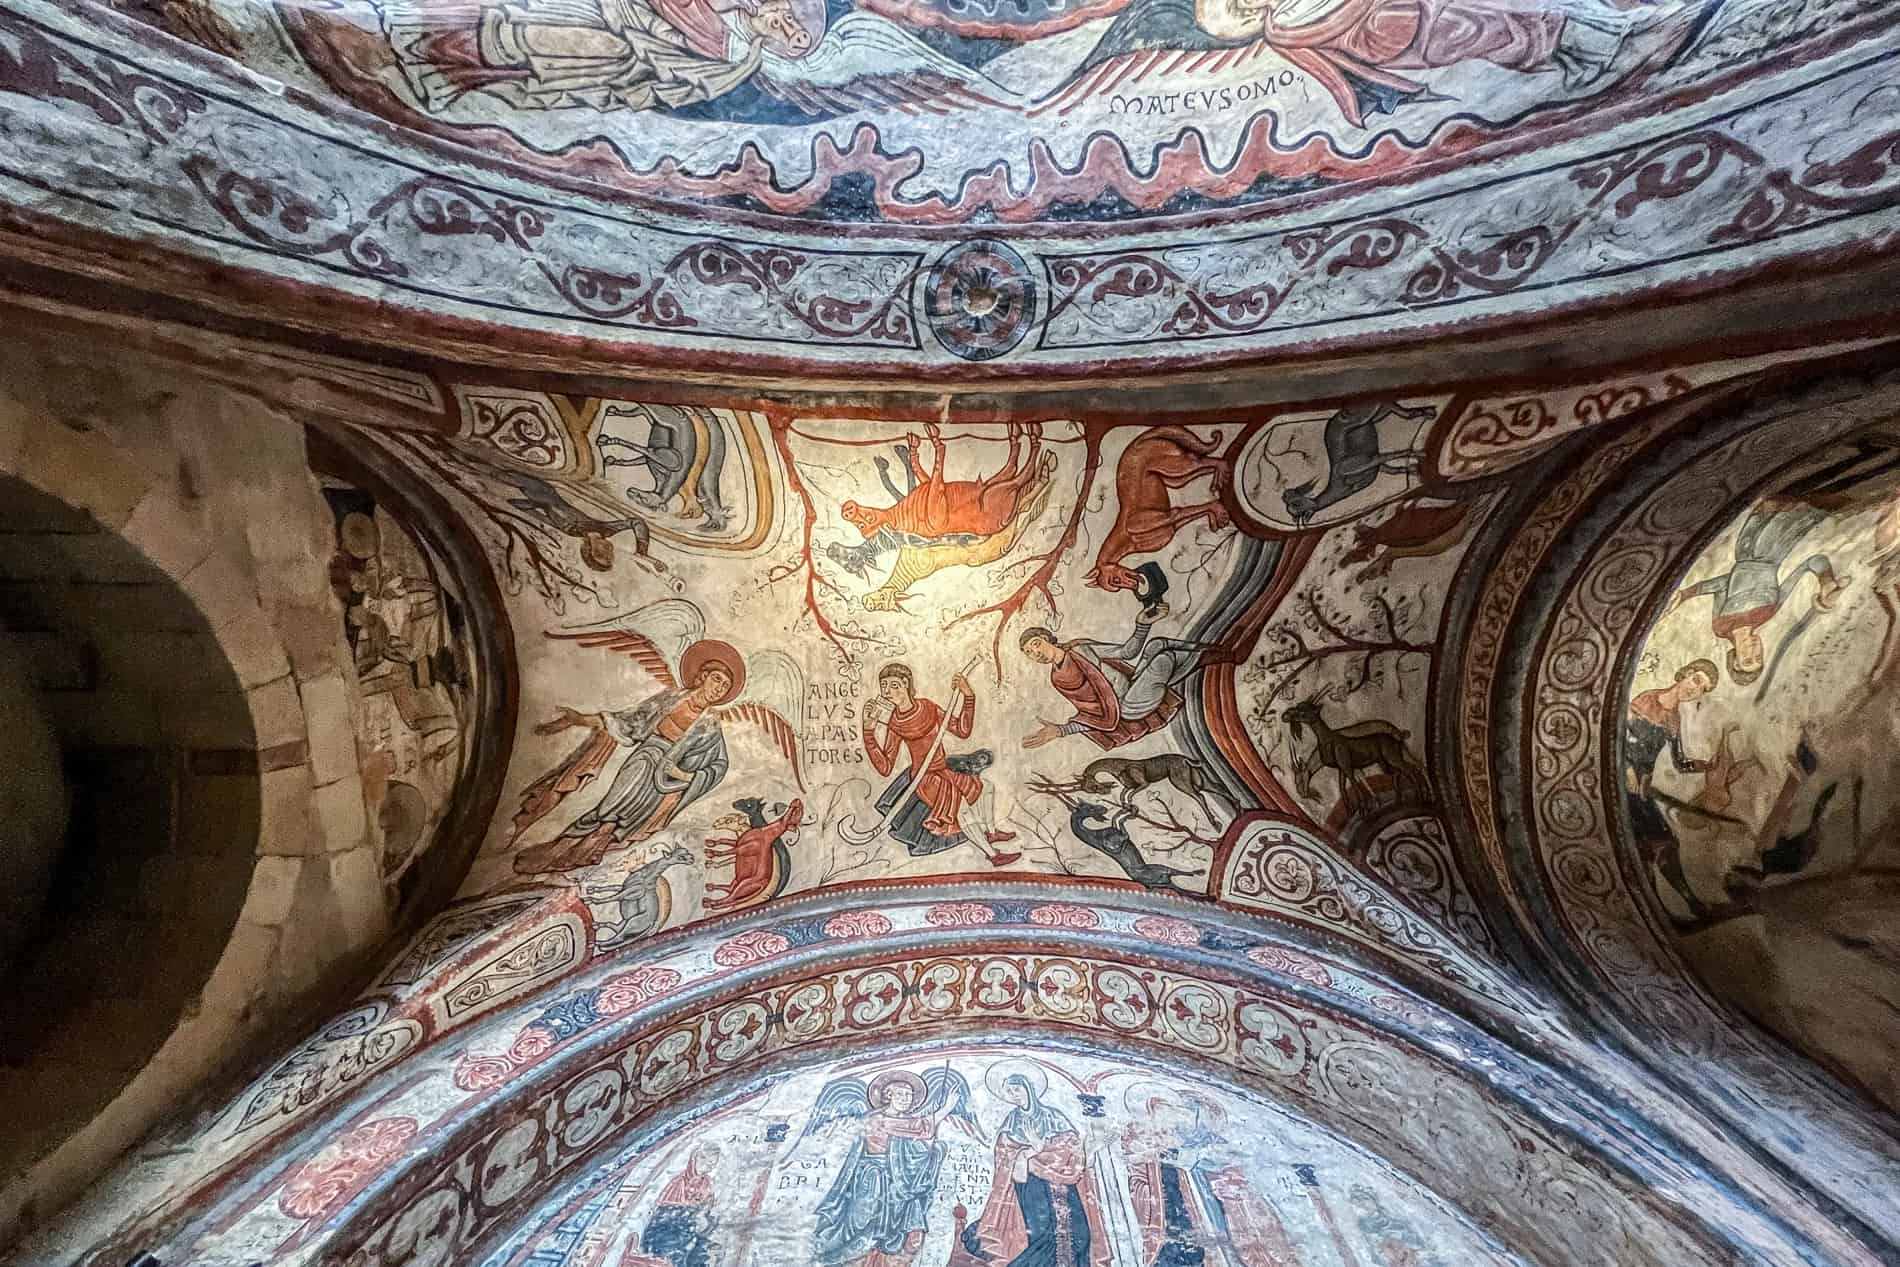 11th century frescos showing biblical tales in the 'Sistine Chapel of Romanesque Art' in León.